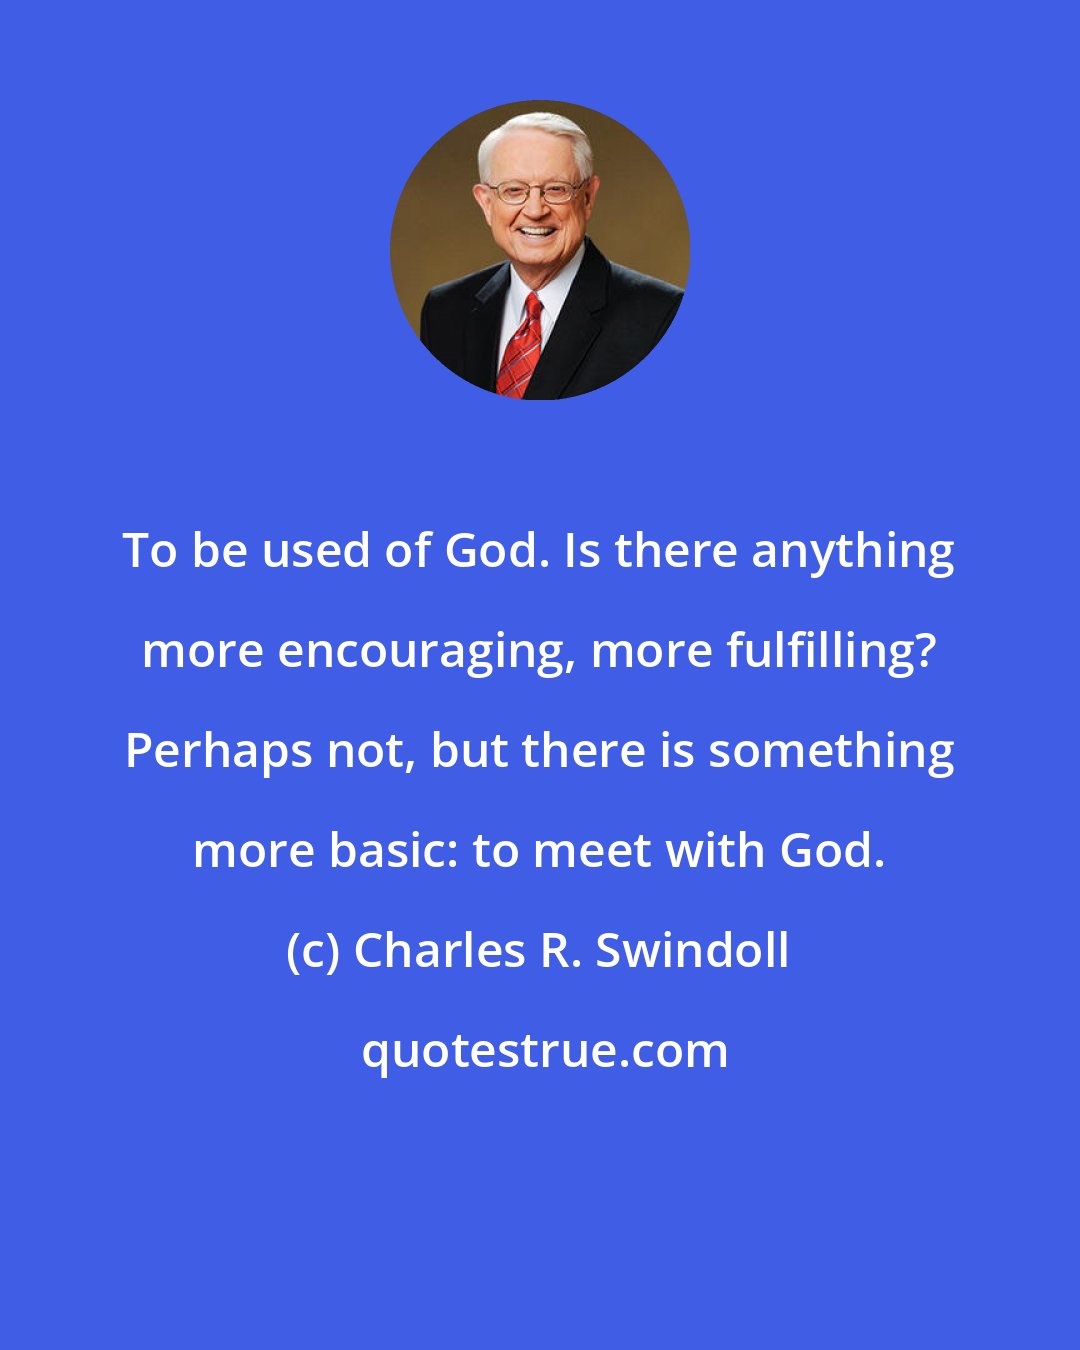 Charles R. Swindoll: To be used of God. Is there anything more encouraging, more fulfilling? Perhaps not, but there is something more basic: to meet with God.